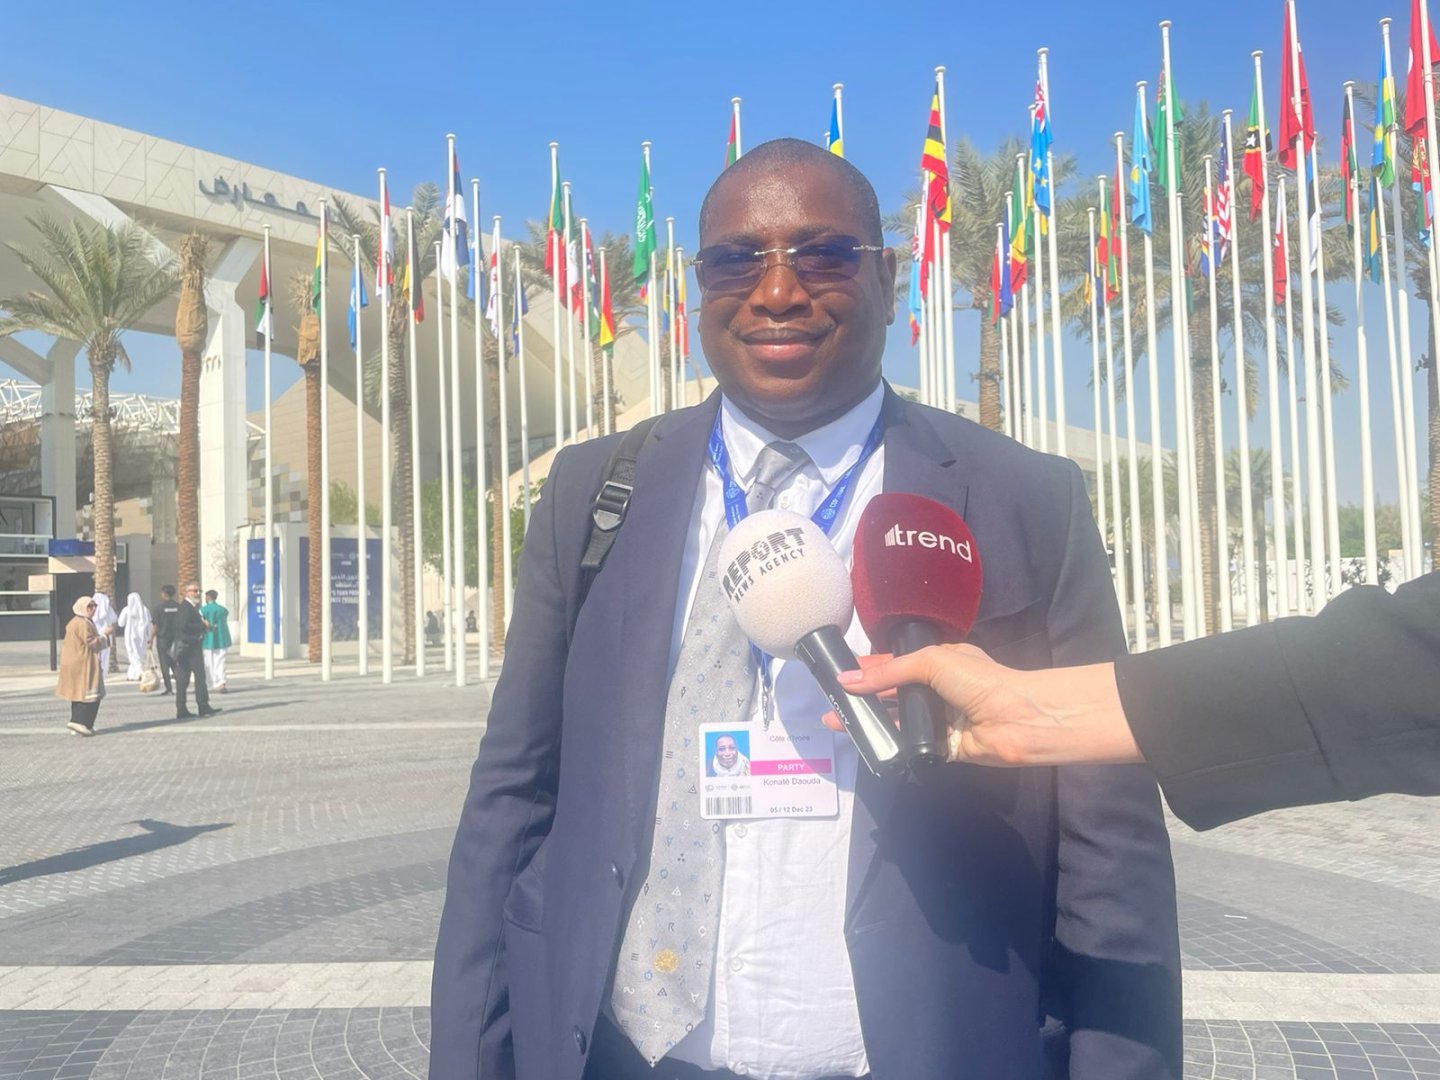 COP 29 in Azerbaijan expected to take concrete actions on financial aspects - Cote d’Ivoire's representative